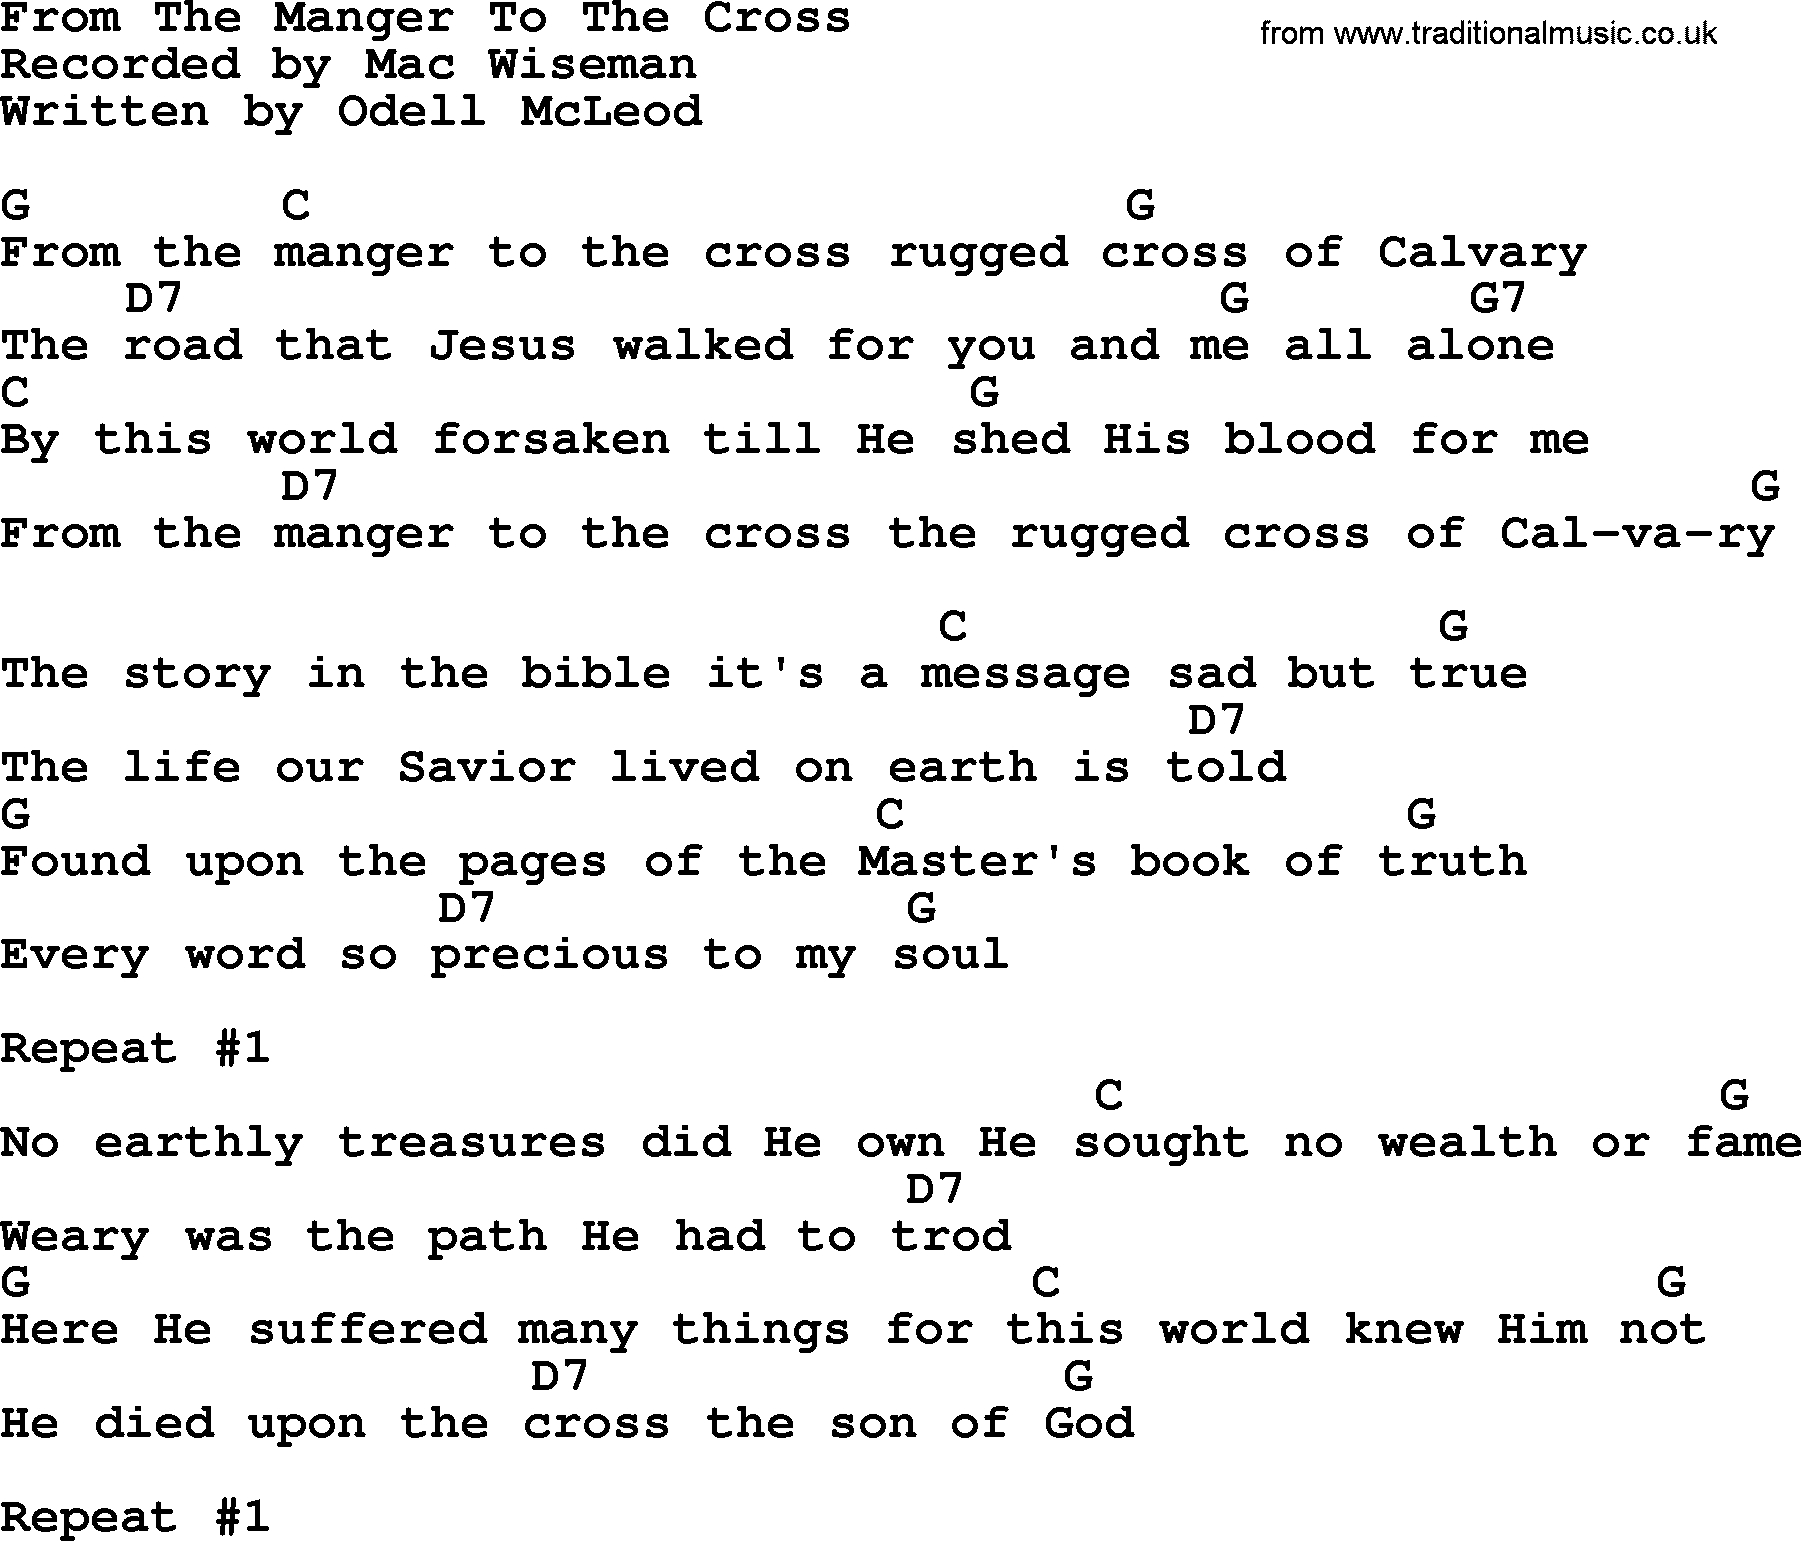 Lead Me To The Cross Chords From The Manger To The Cross Bluegrass Lyrics With Chords